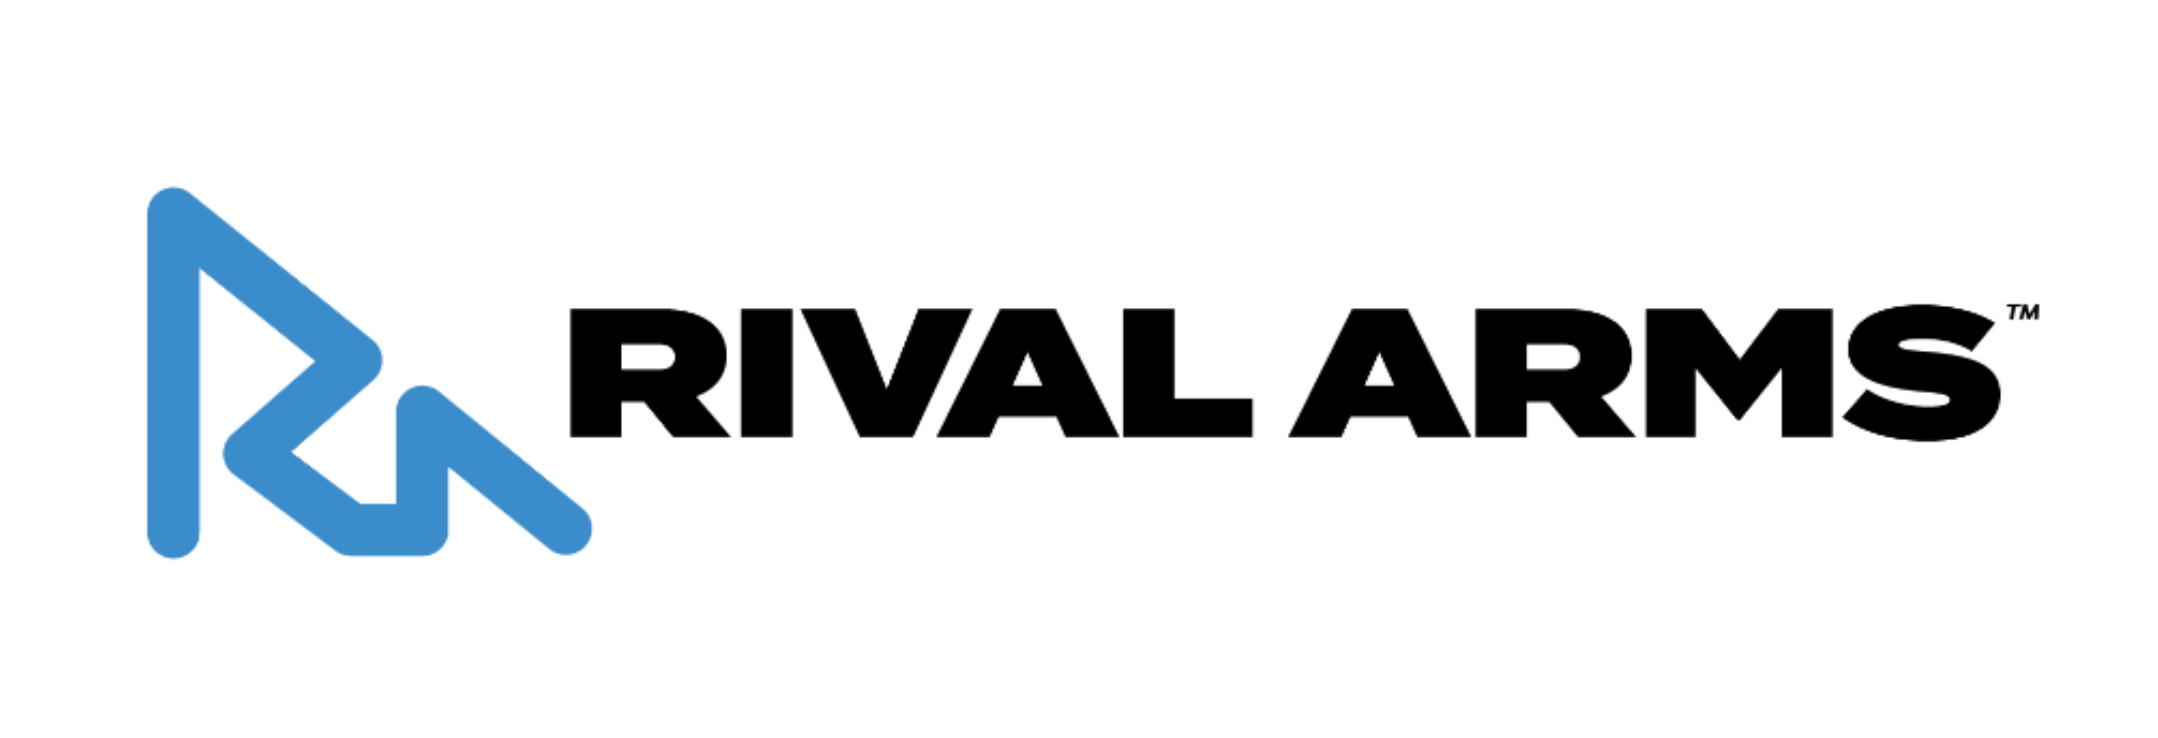 Rival Arms